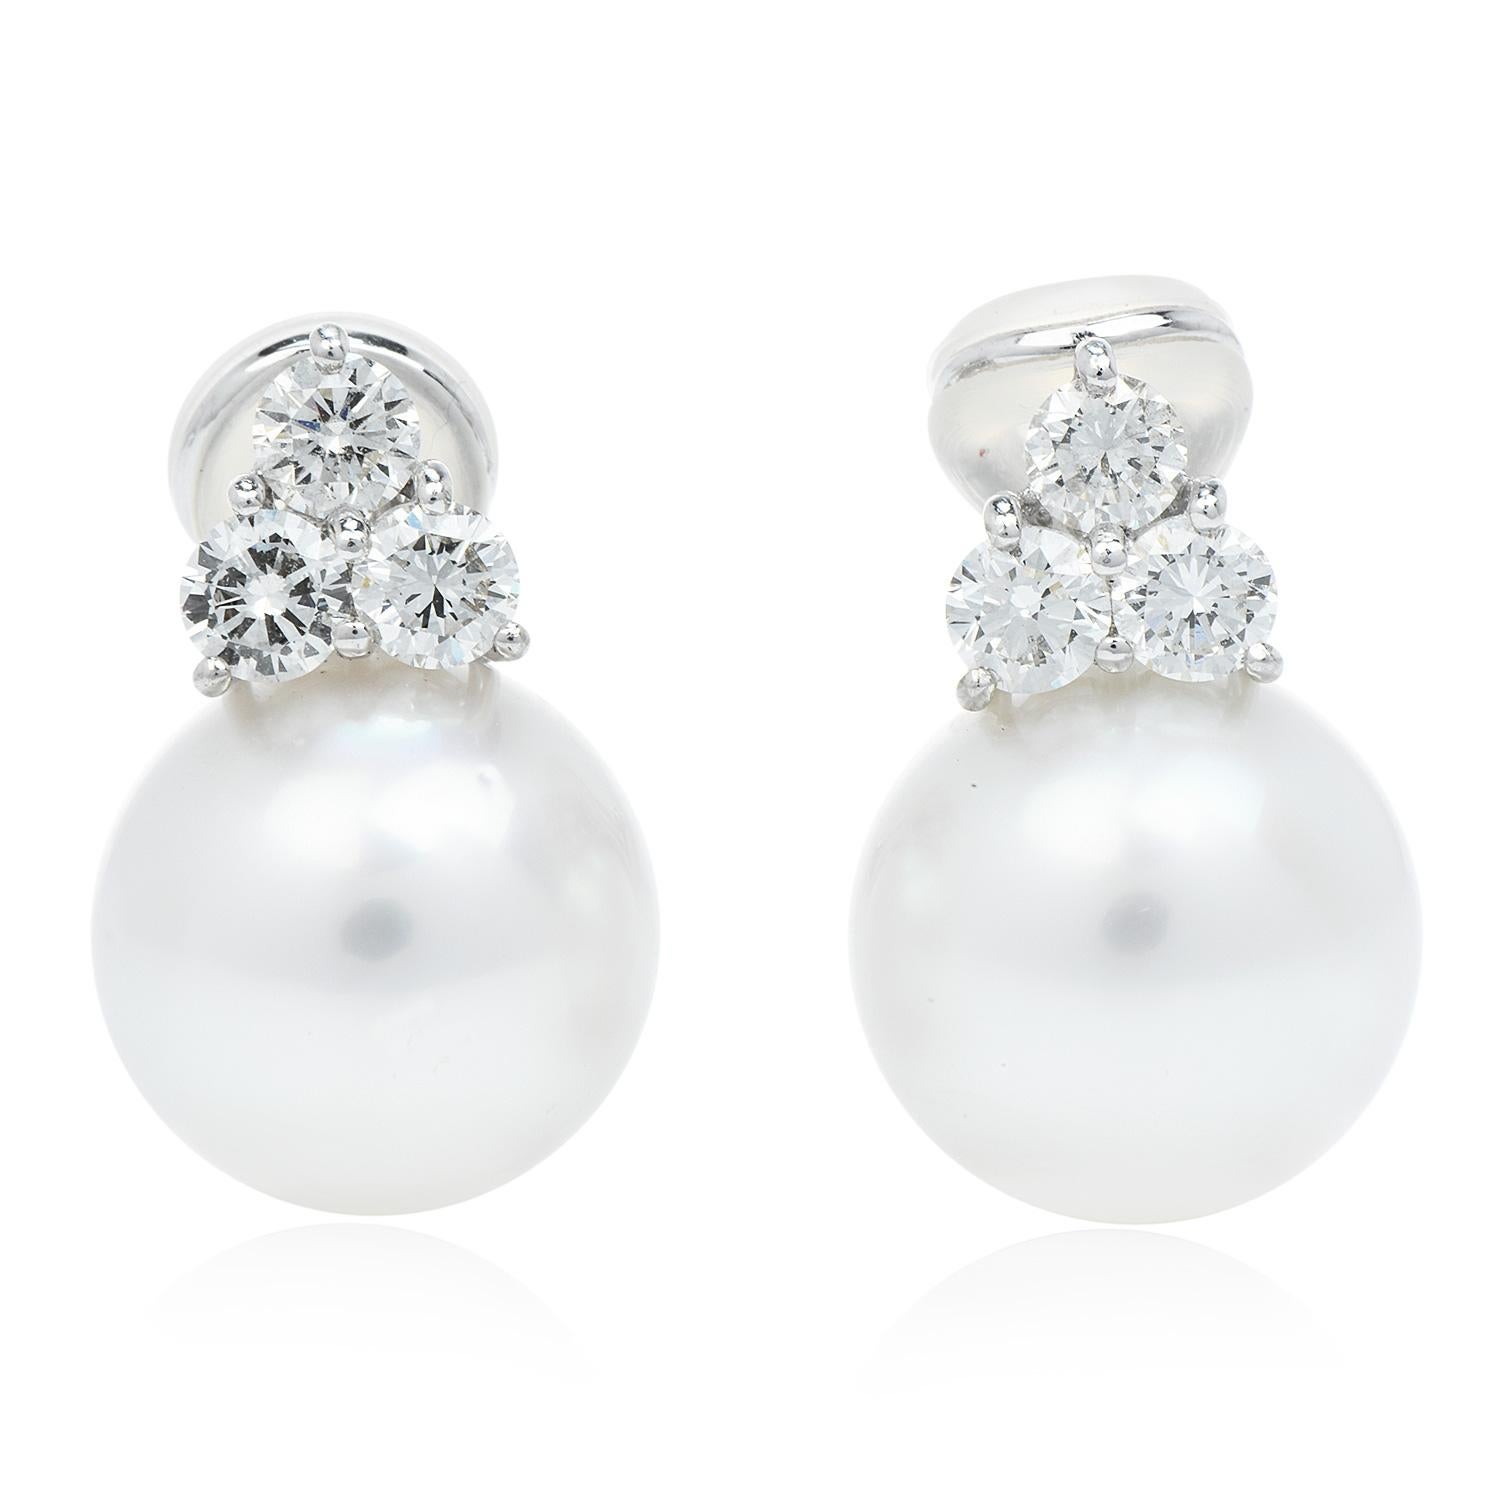 Looking to match a strand of pearls with an Exceptional Size & Luster Earrings? 

Here is your perfect pair. 

Crafted in solid 18K white gold, they have 2 Fine South Sea Pearls, 14.5 mm, perfectly round with white-silver undertones, high luster &